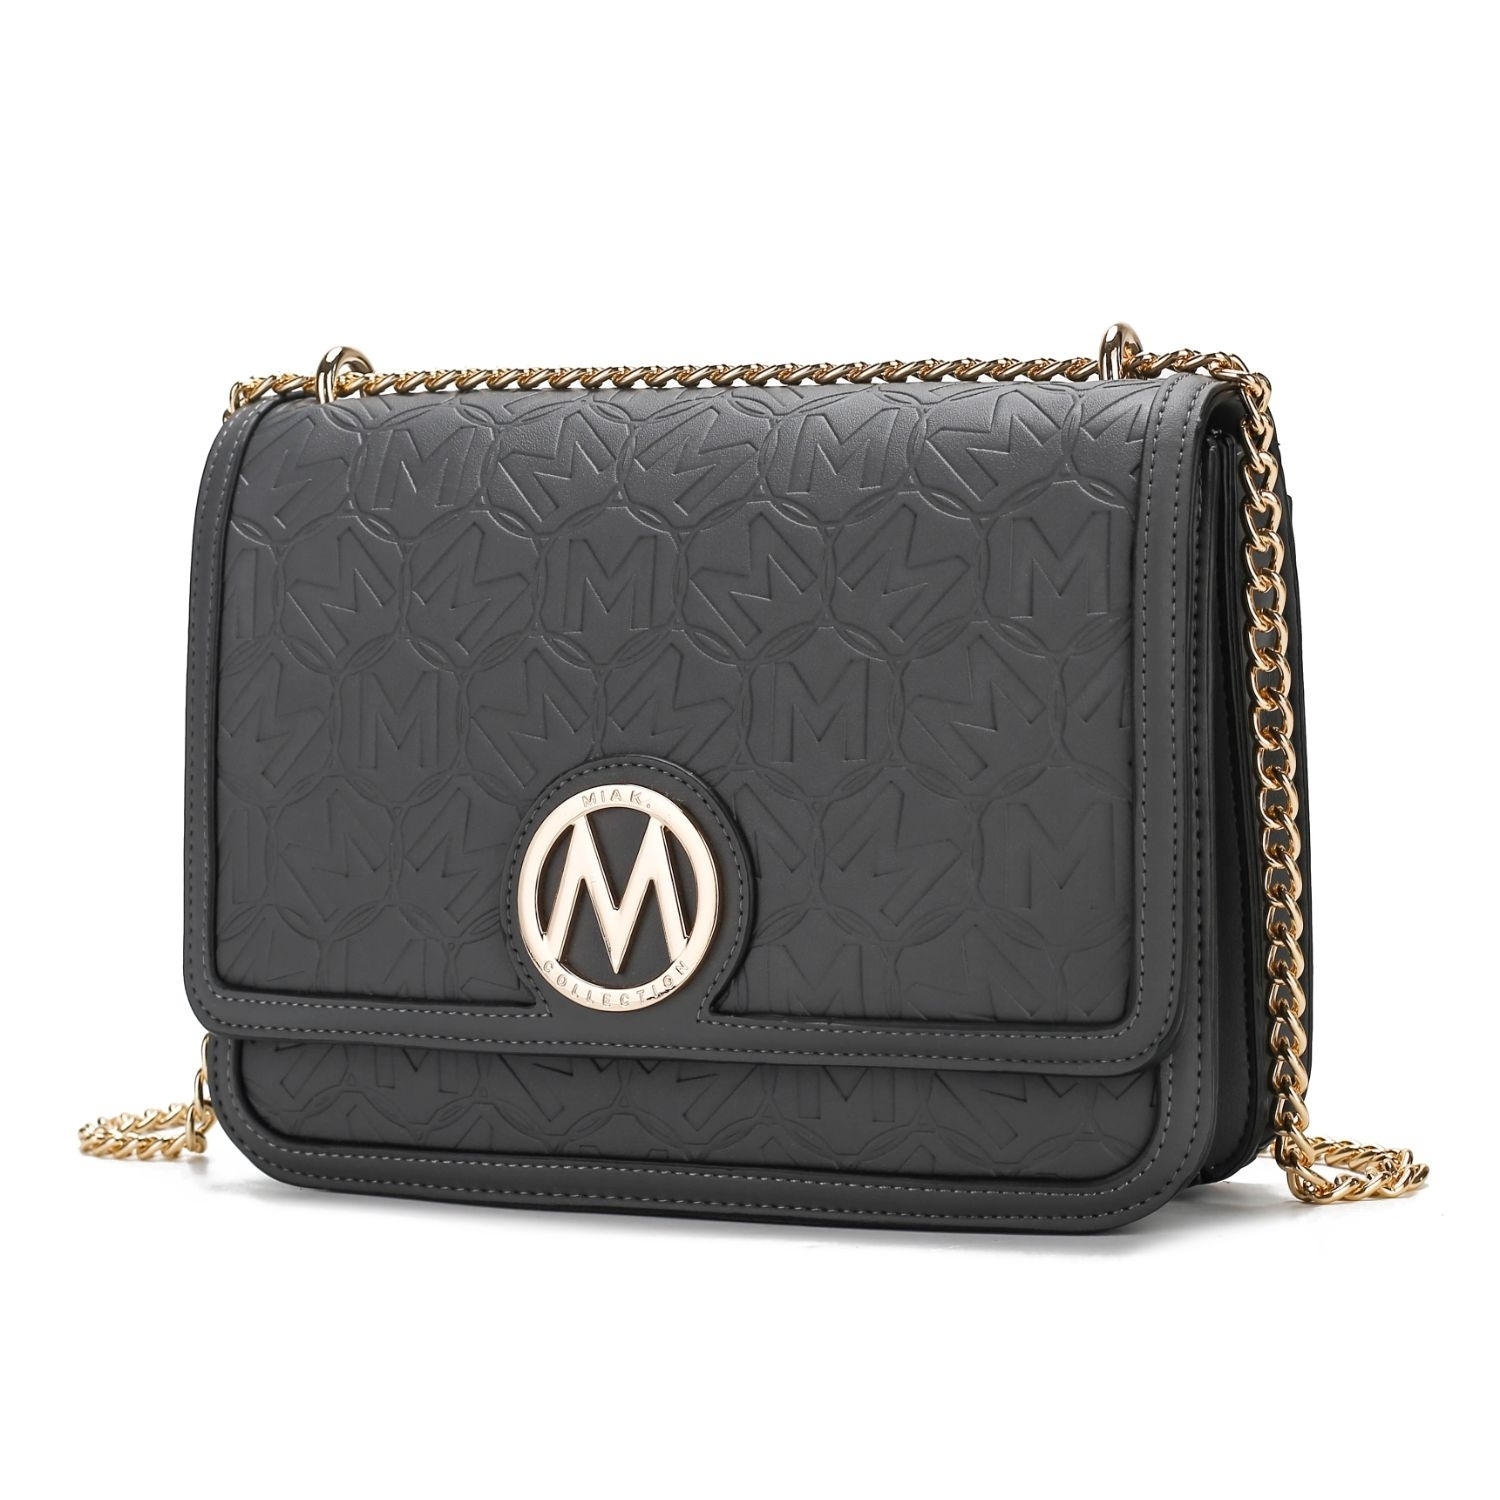 MKF Collection Amiyah Vegan Leather Women's Shoulder Bag By Mia K - Charcoal